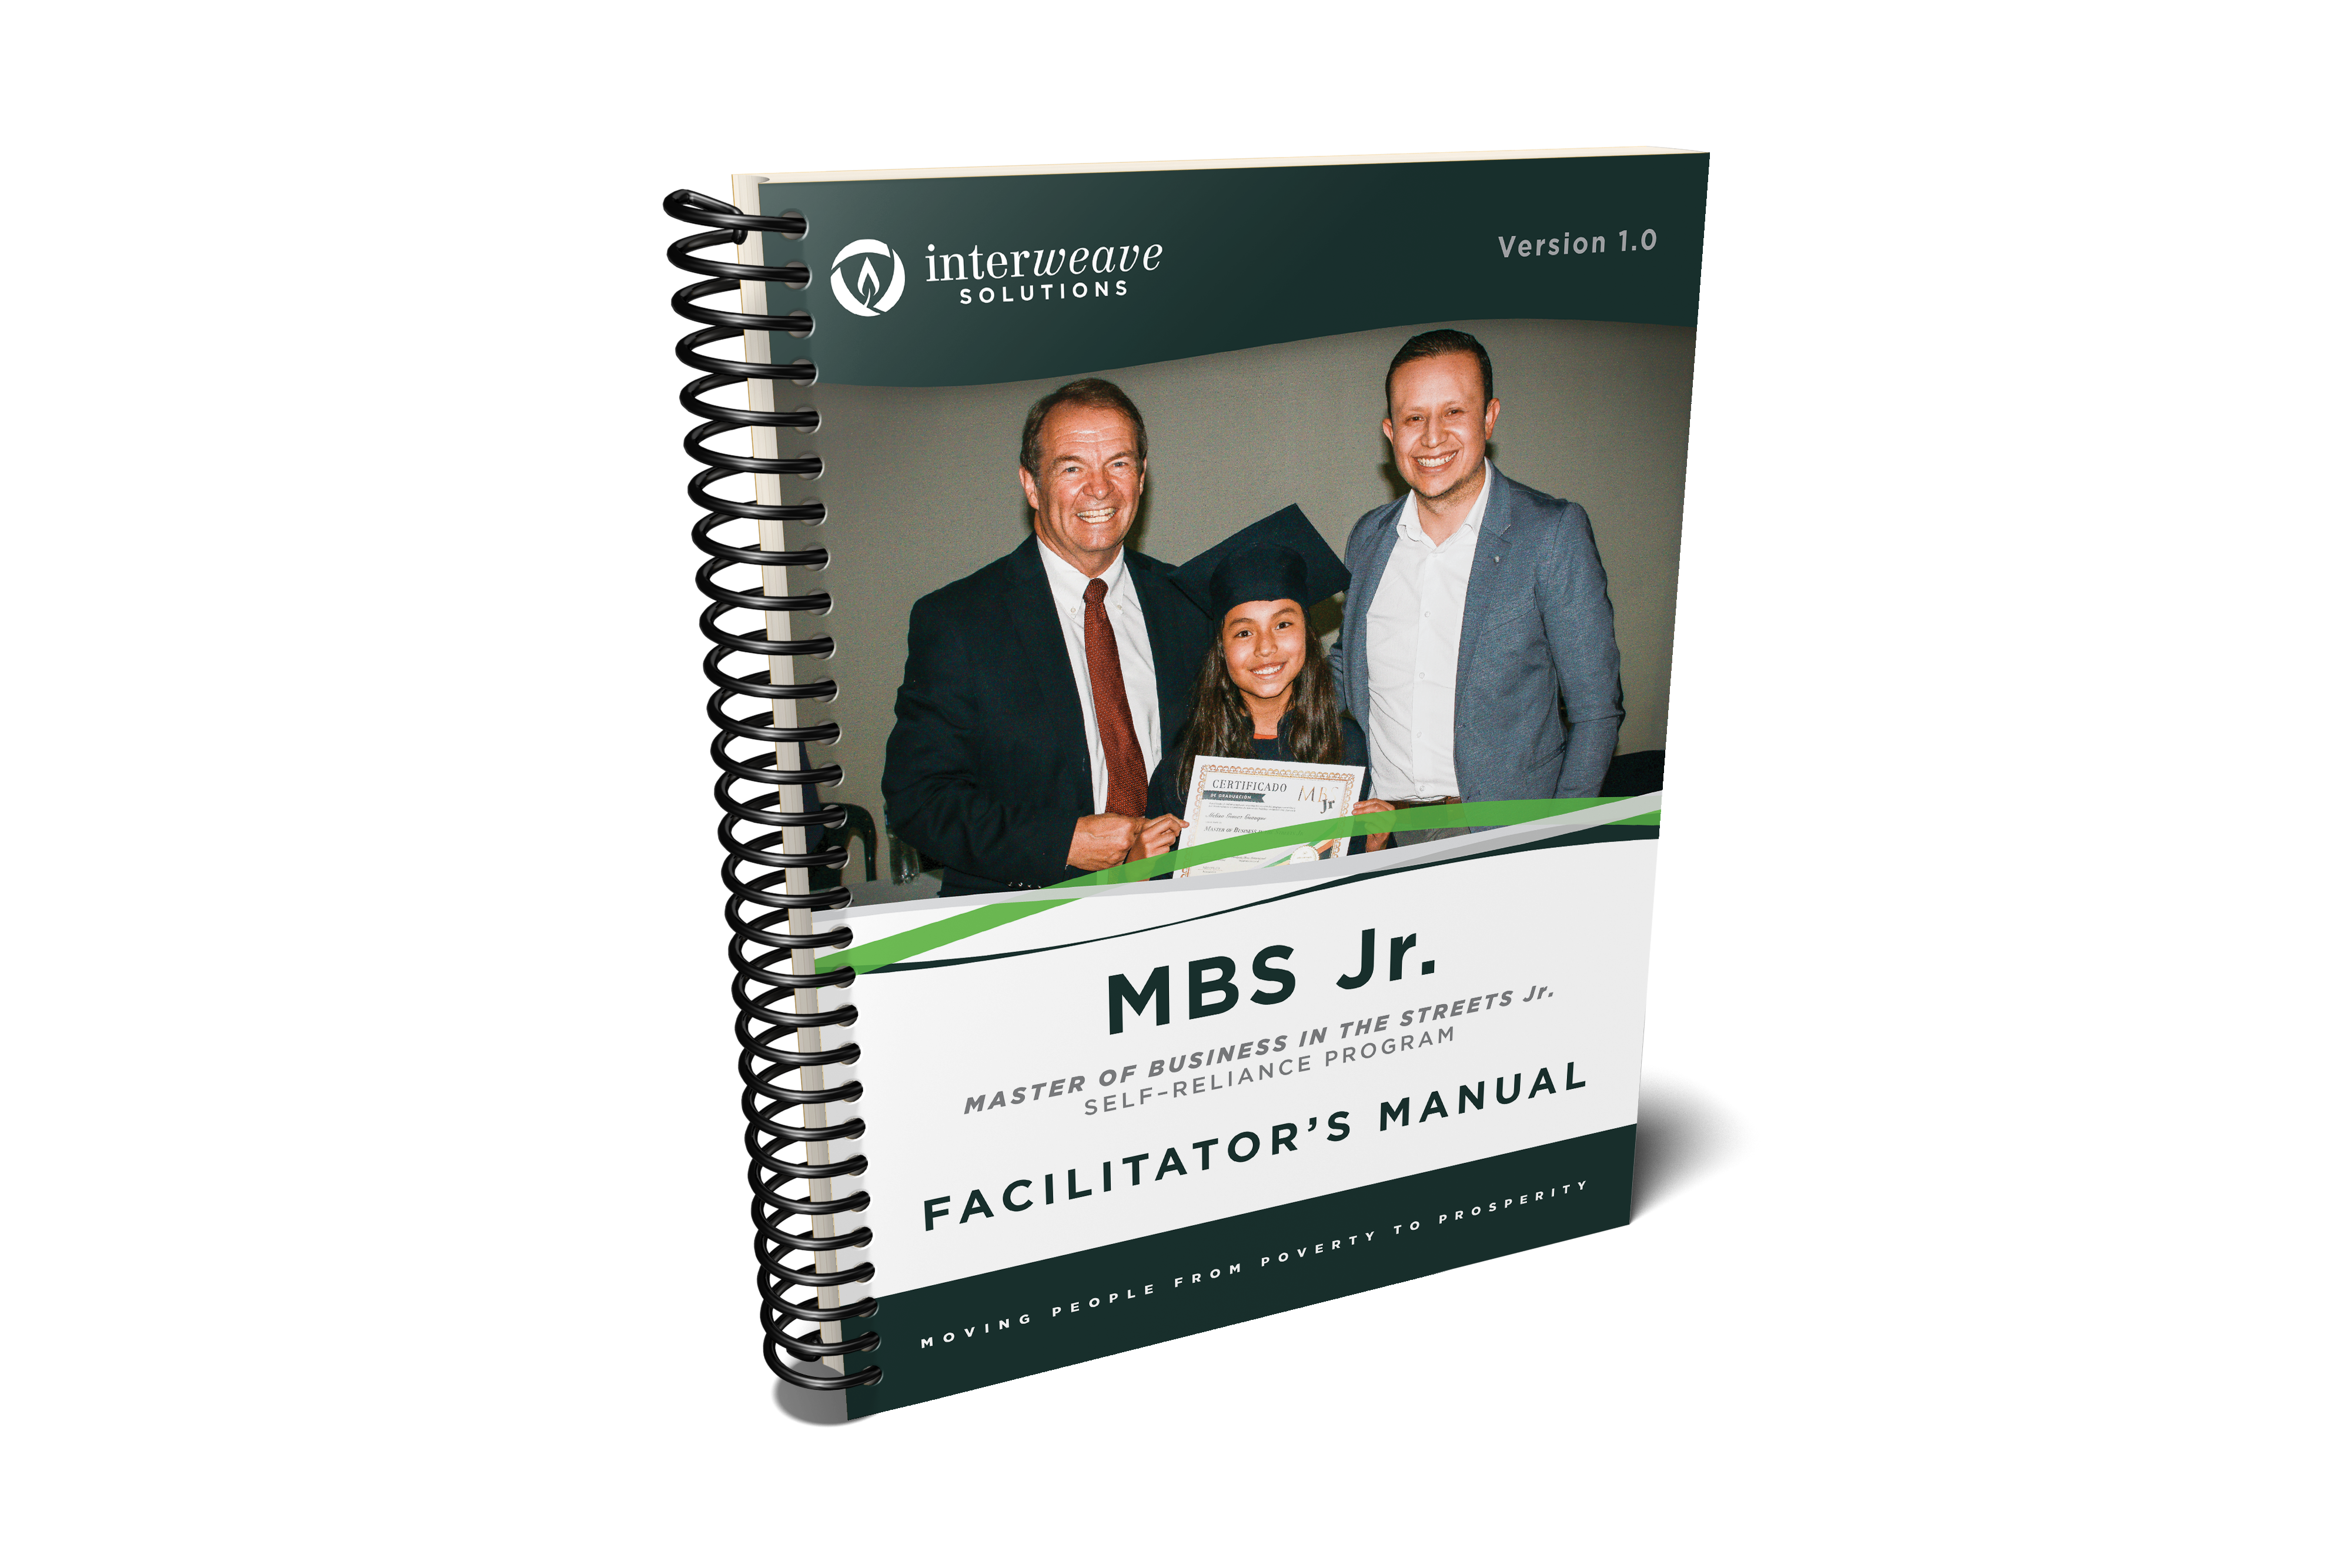 To download the MBS Jr. Facilitator's Manual, please click here.